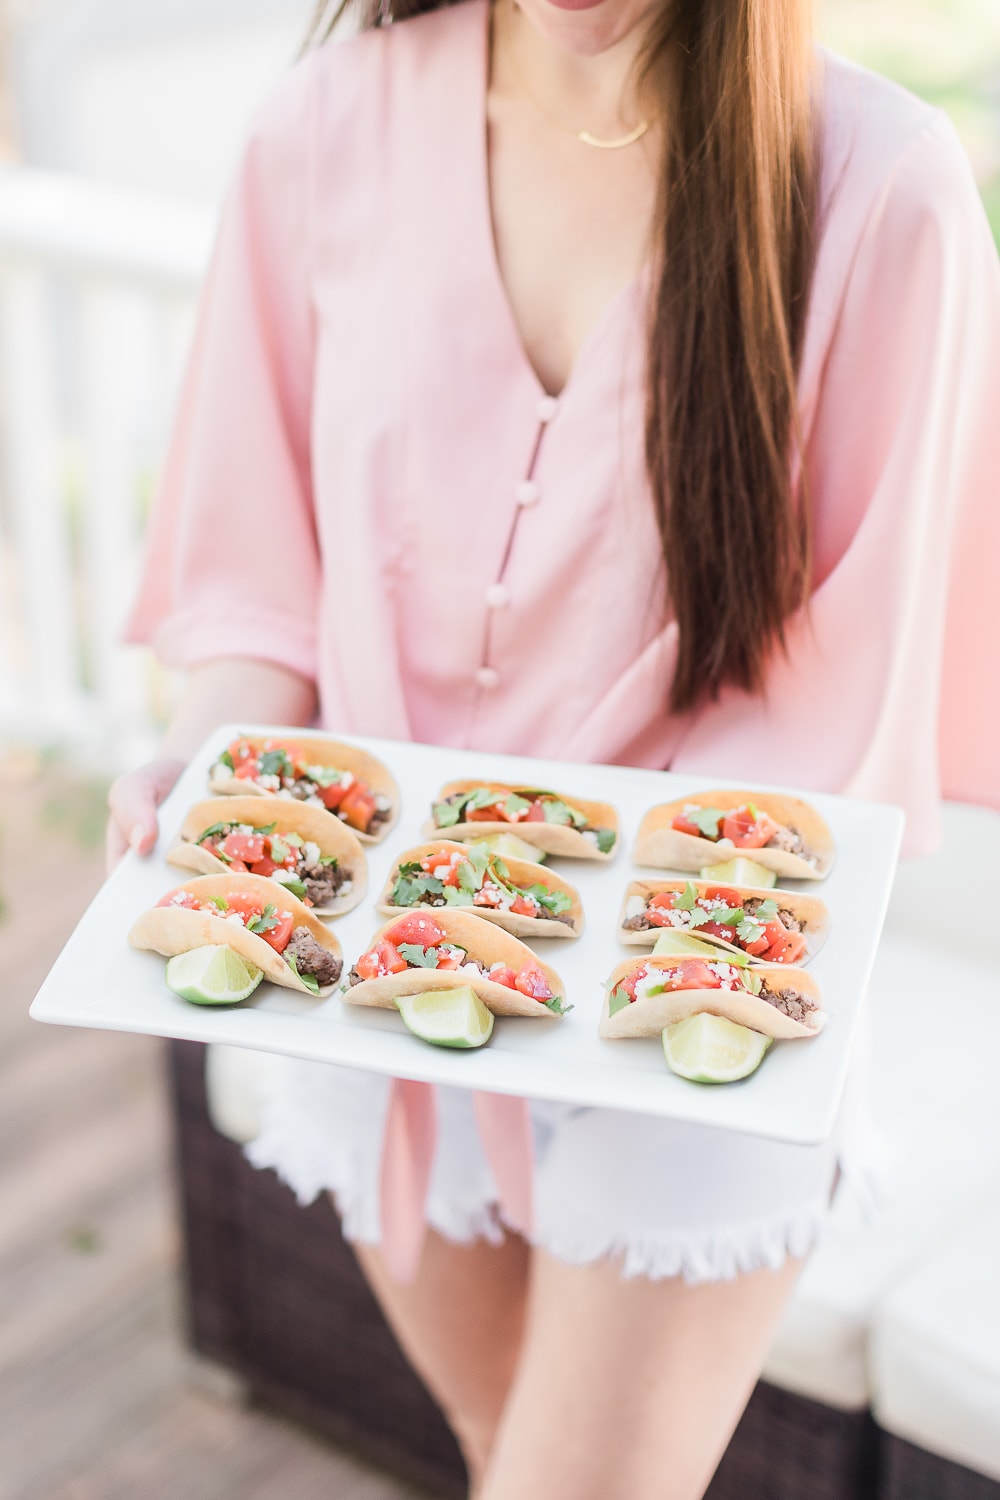 Easy mini beef tacos recipe adapted from Pizzazzerie's Entertain in Style by Stephanie Ziajka on Diary of a Debutante